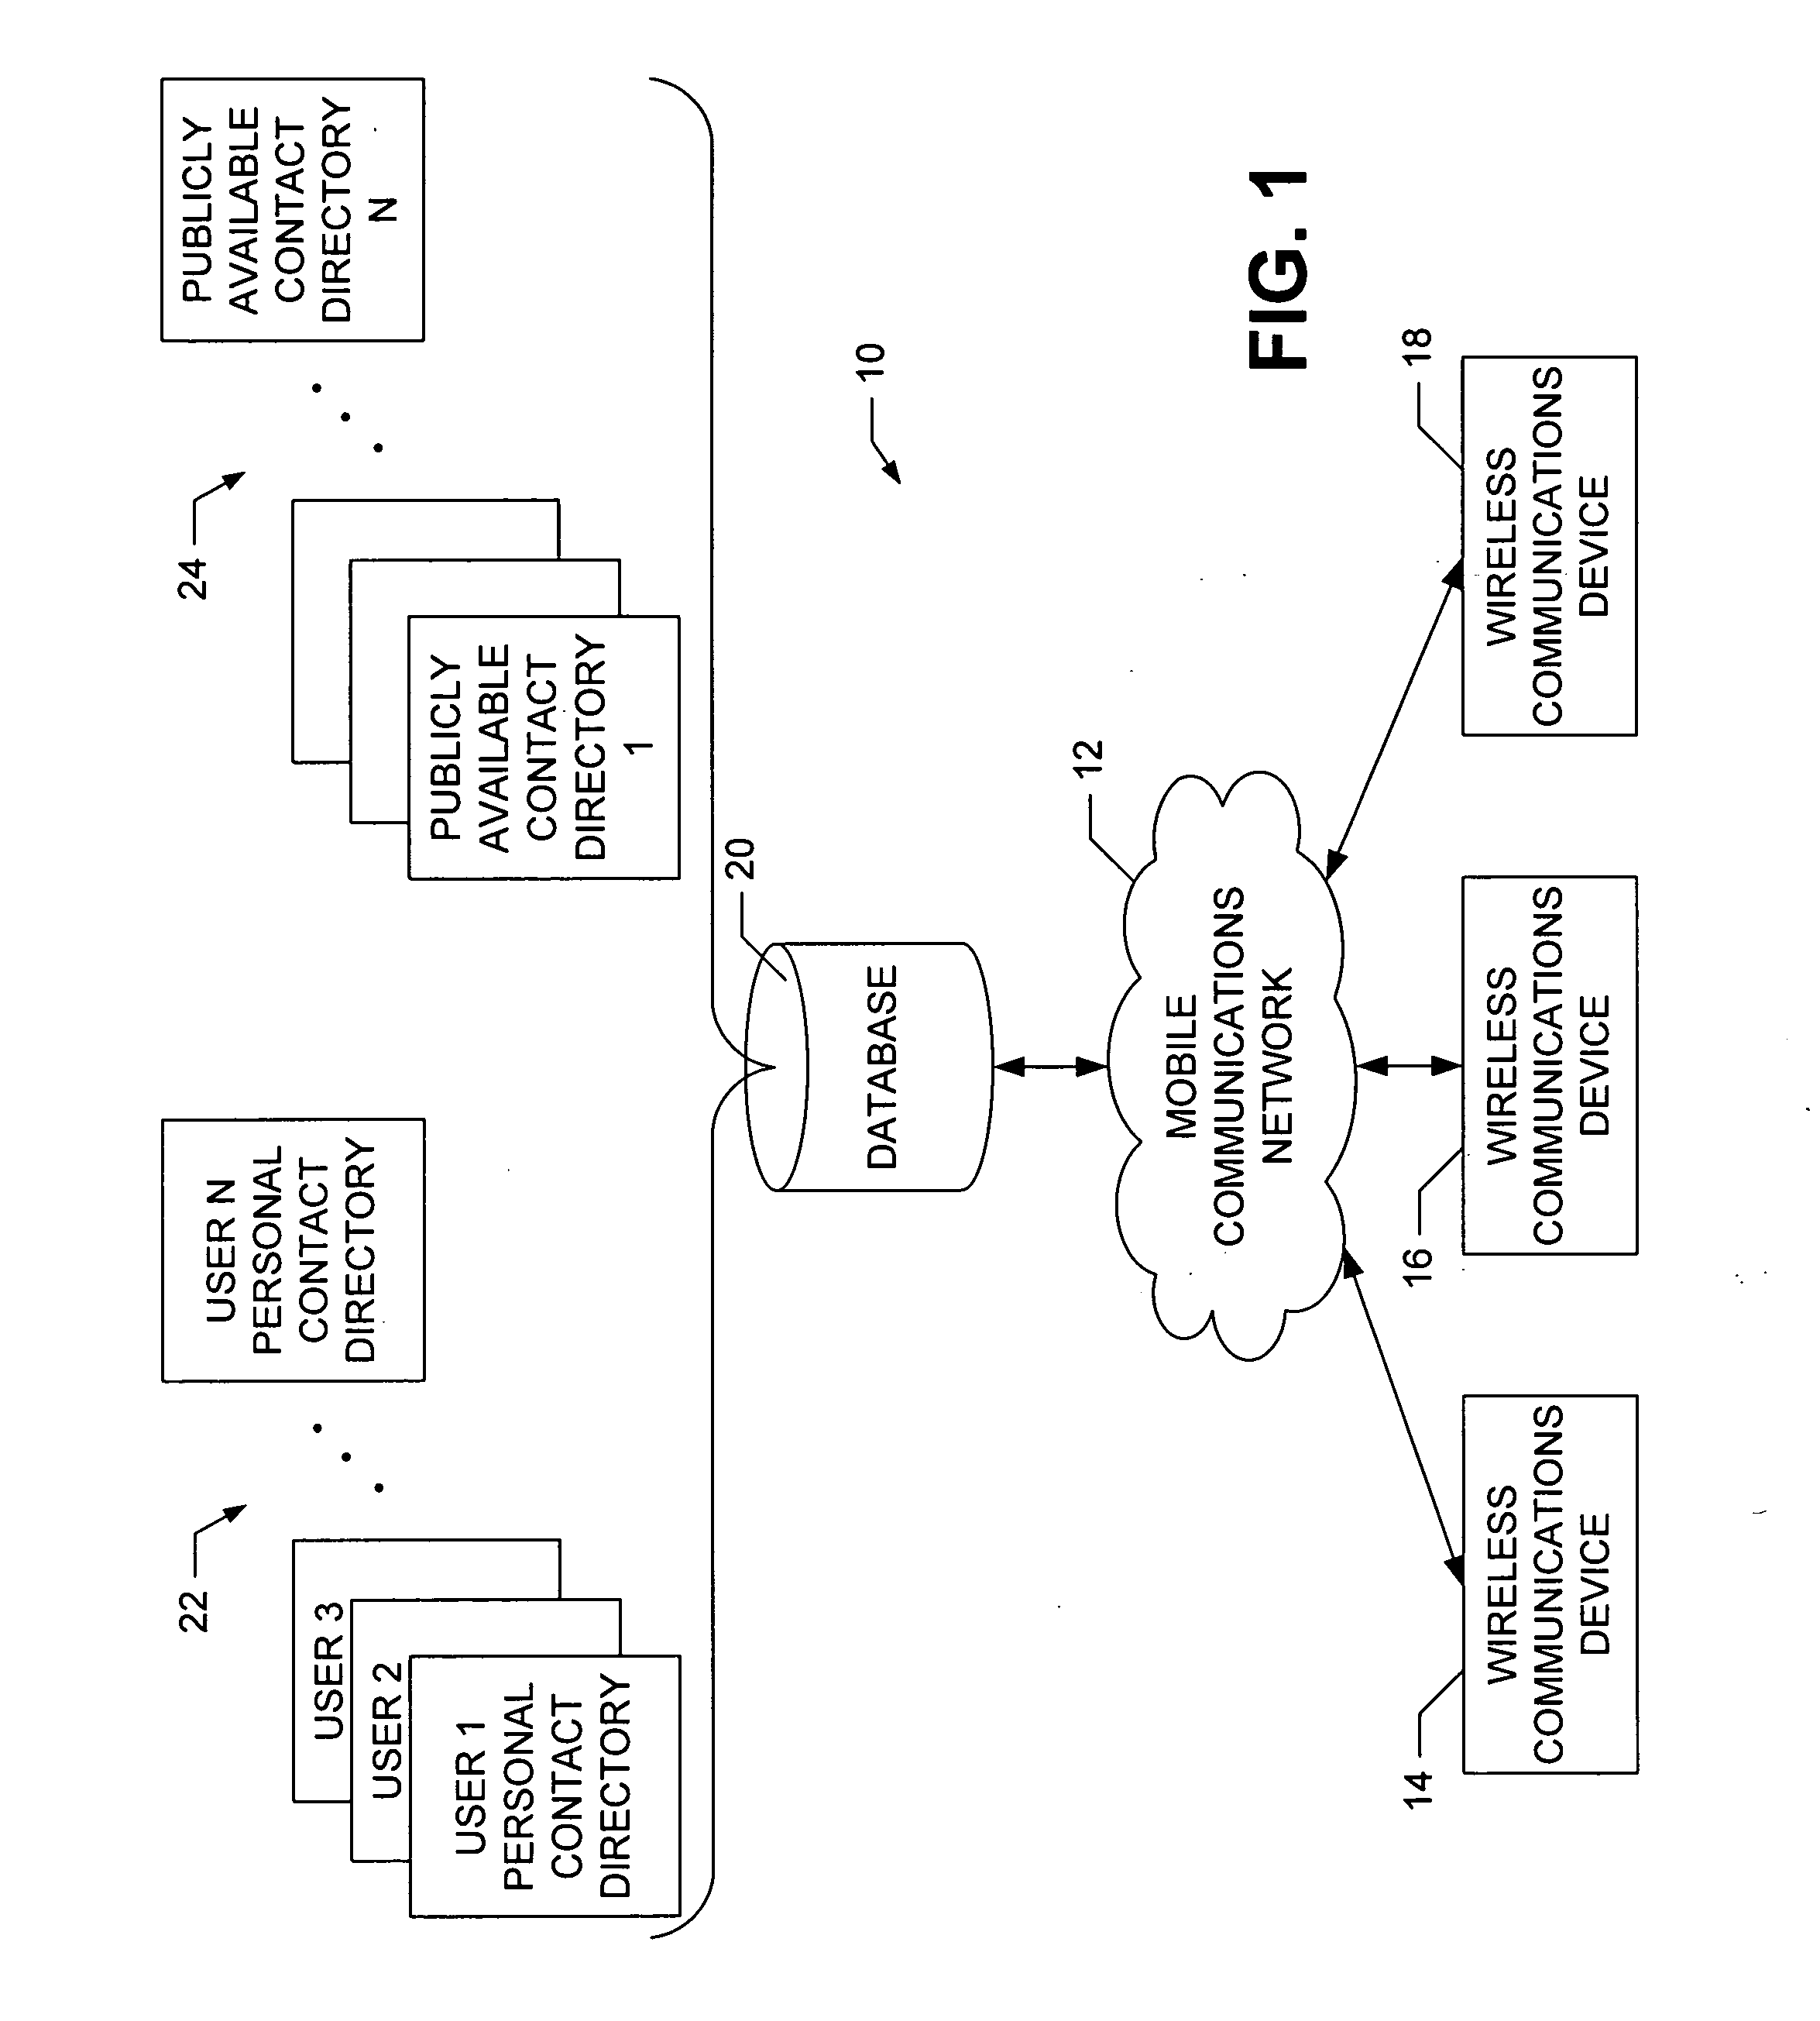 System and method for sharing a personal contact directory